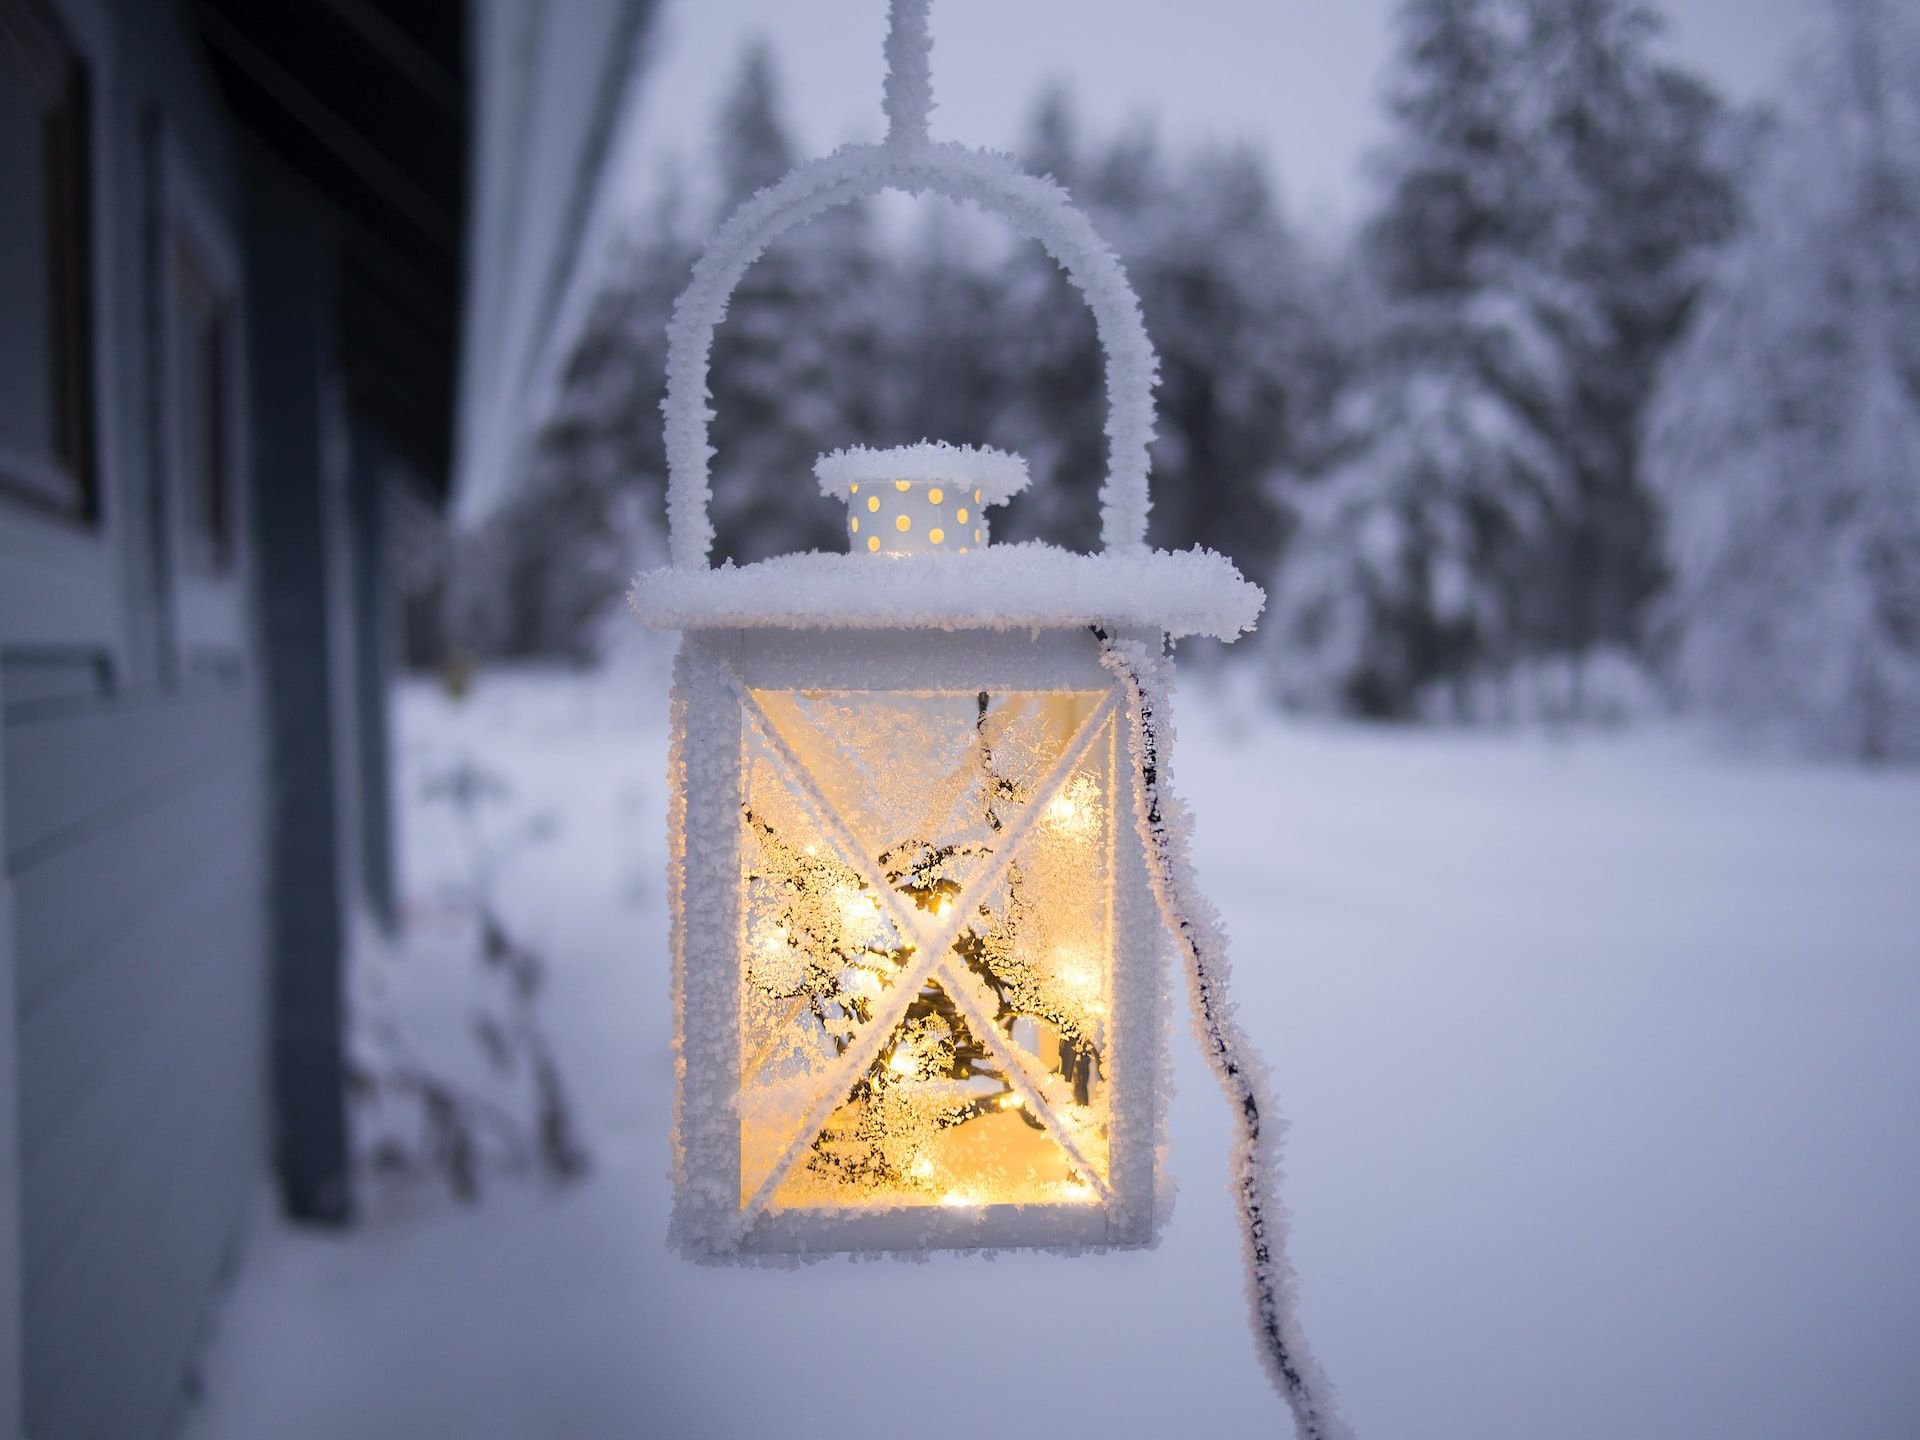 Lantern filled with Christmas lights